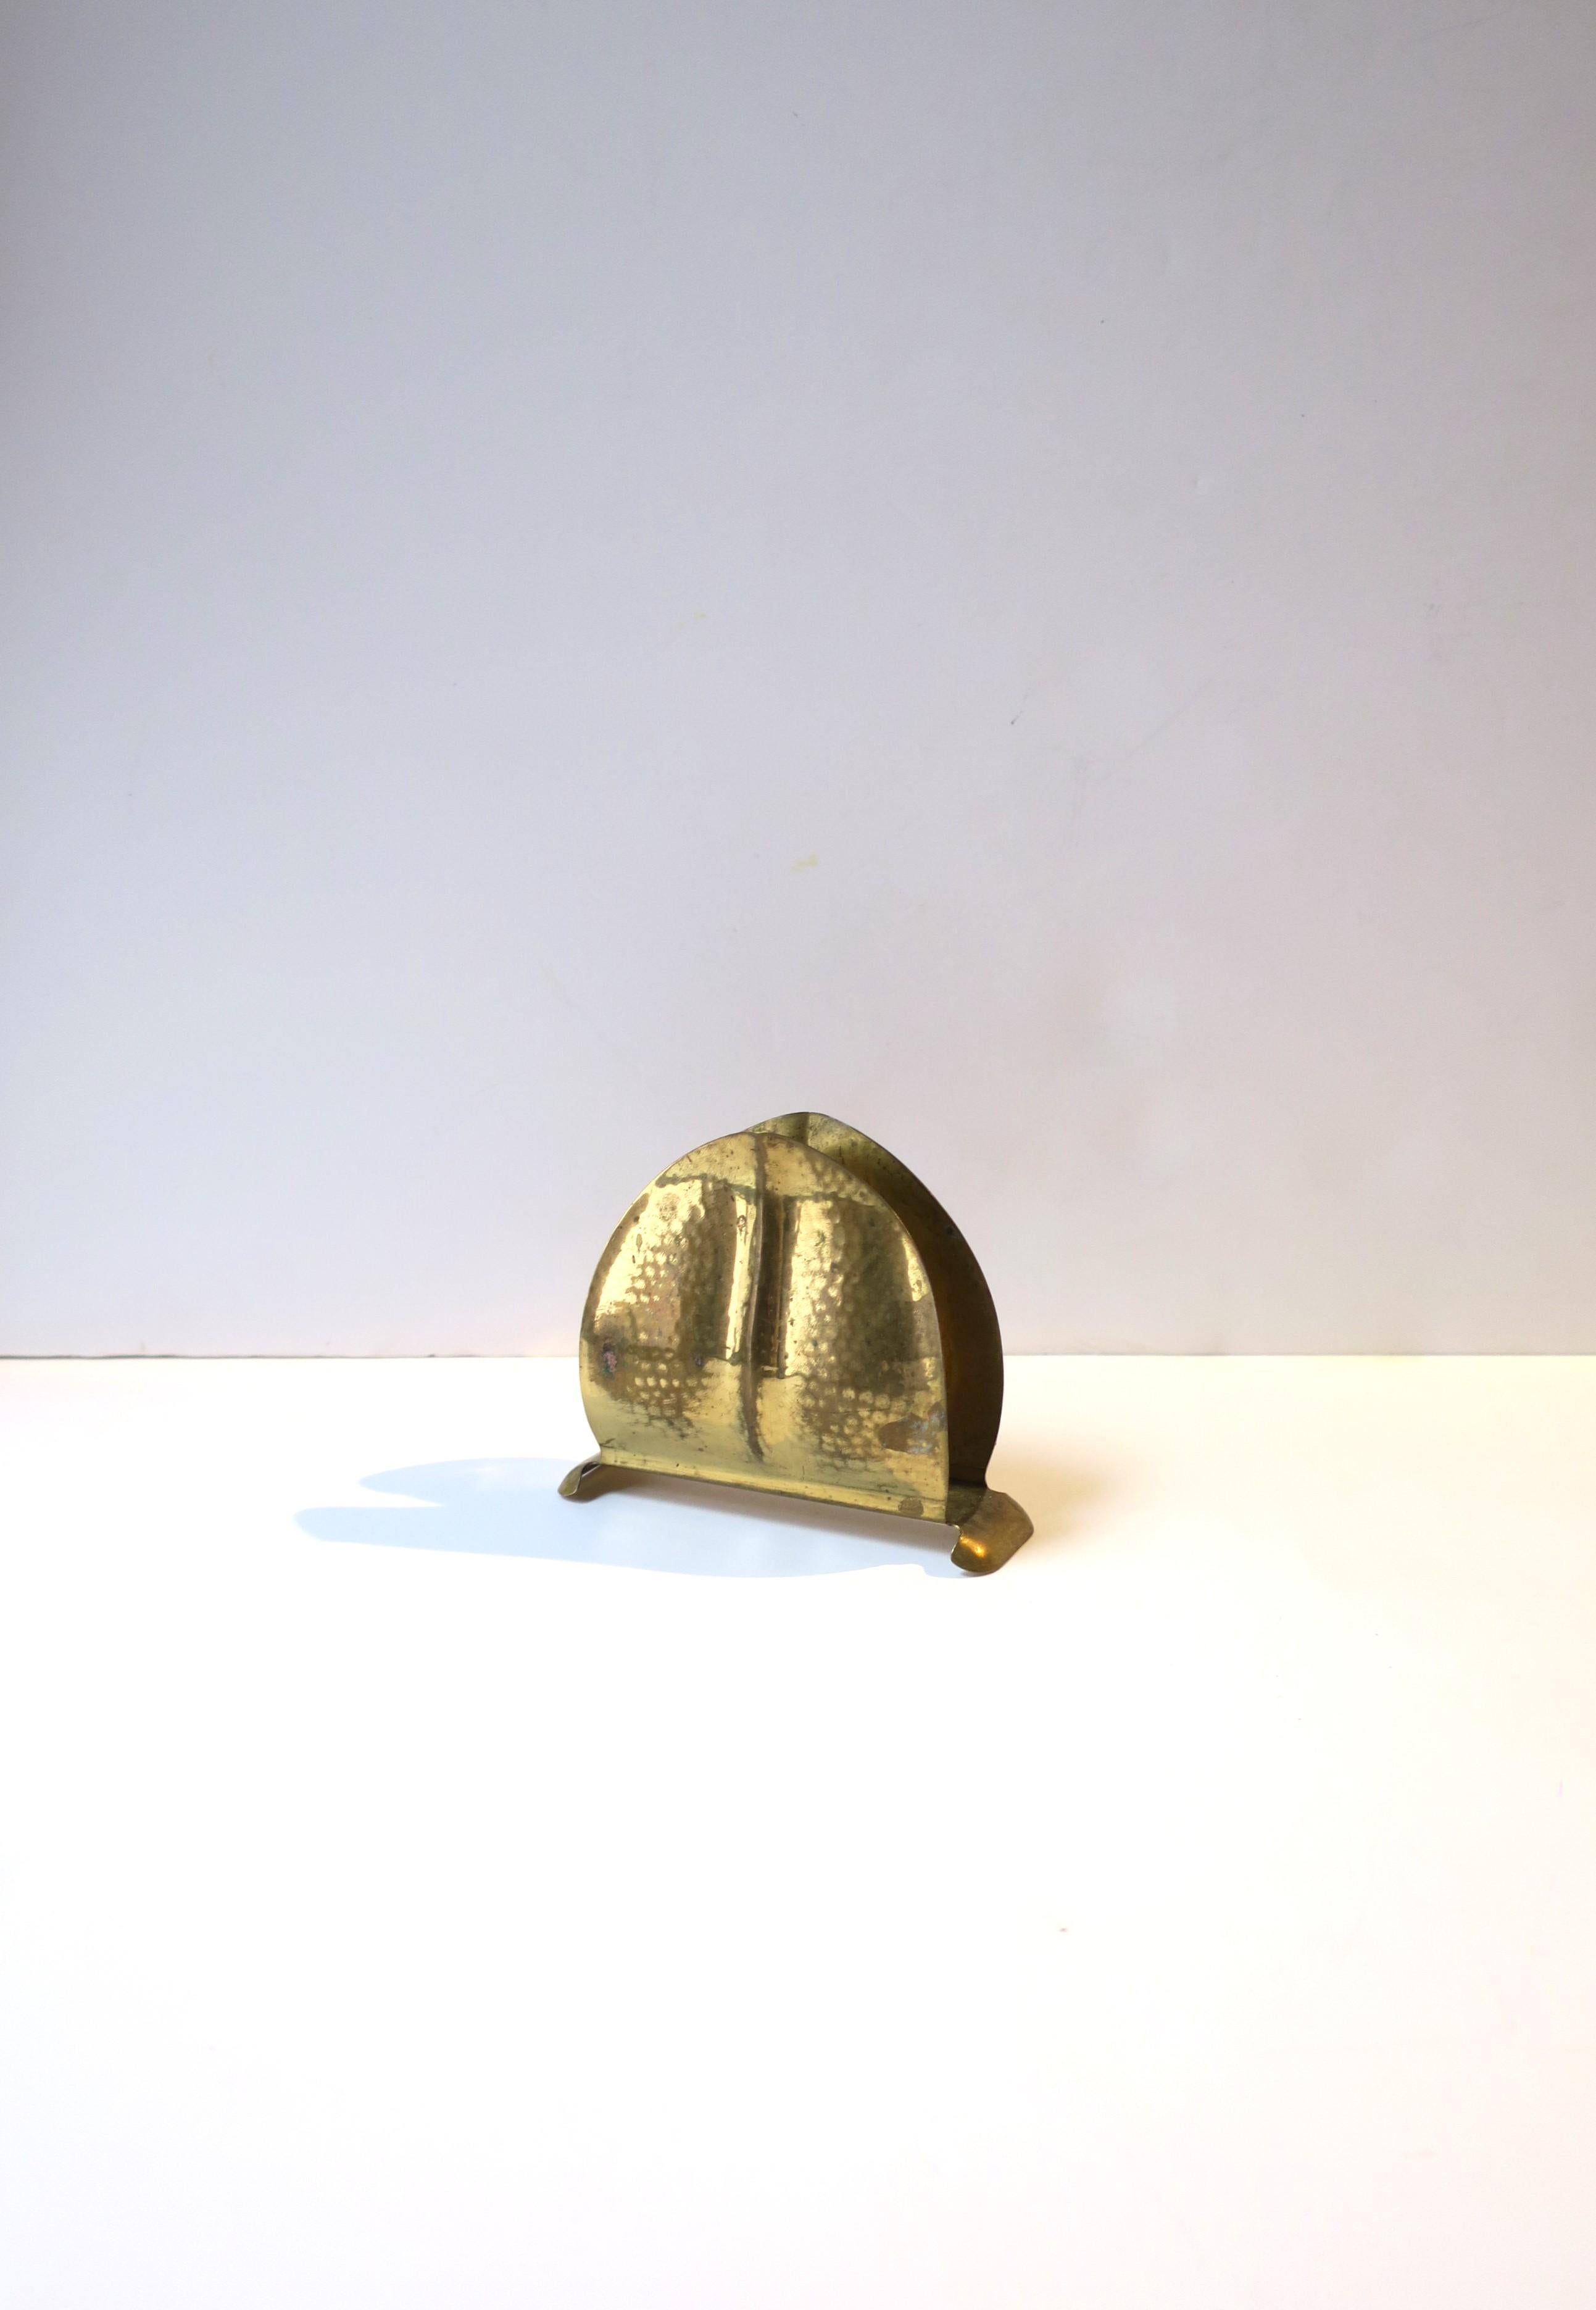 A beautiful Swedish hammered brass desk letter or napkin holder, Art Nouveau design, circa early-20th century, Sweden. Piece is hammered brass with an Art Nouveau leaf-design. Marked on underside 'Made in Sweden' as shown in last image (close-up.)